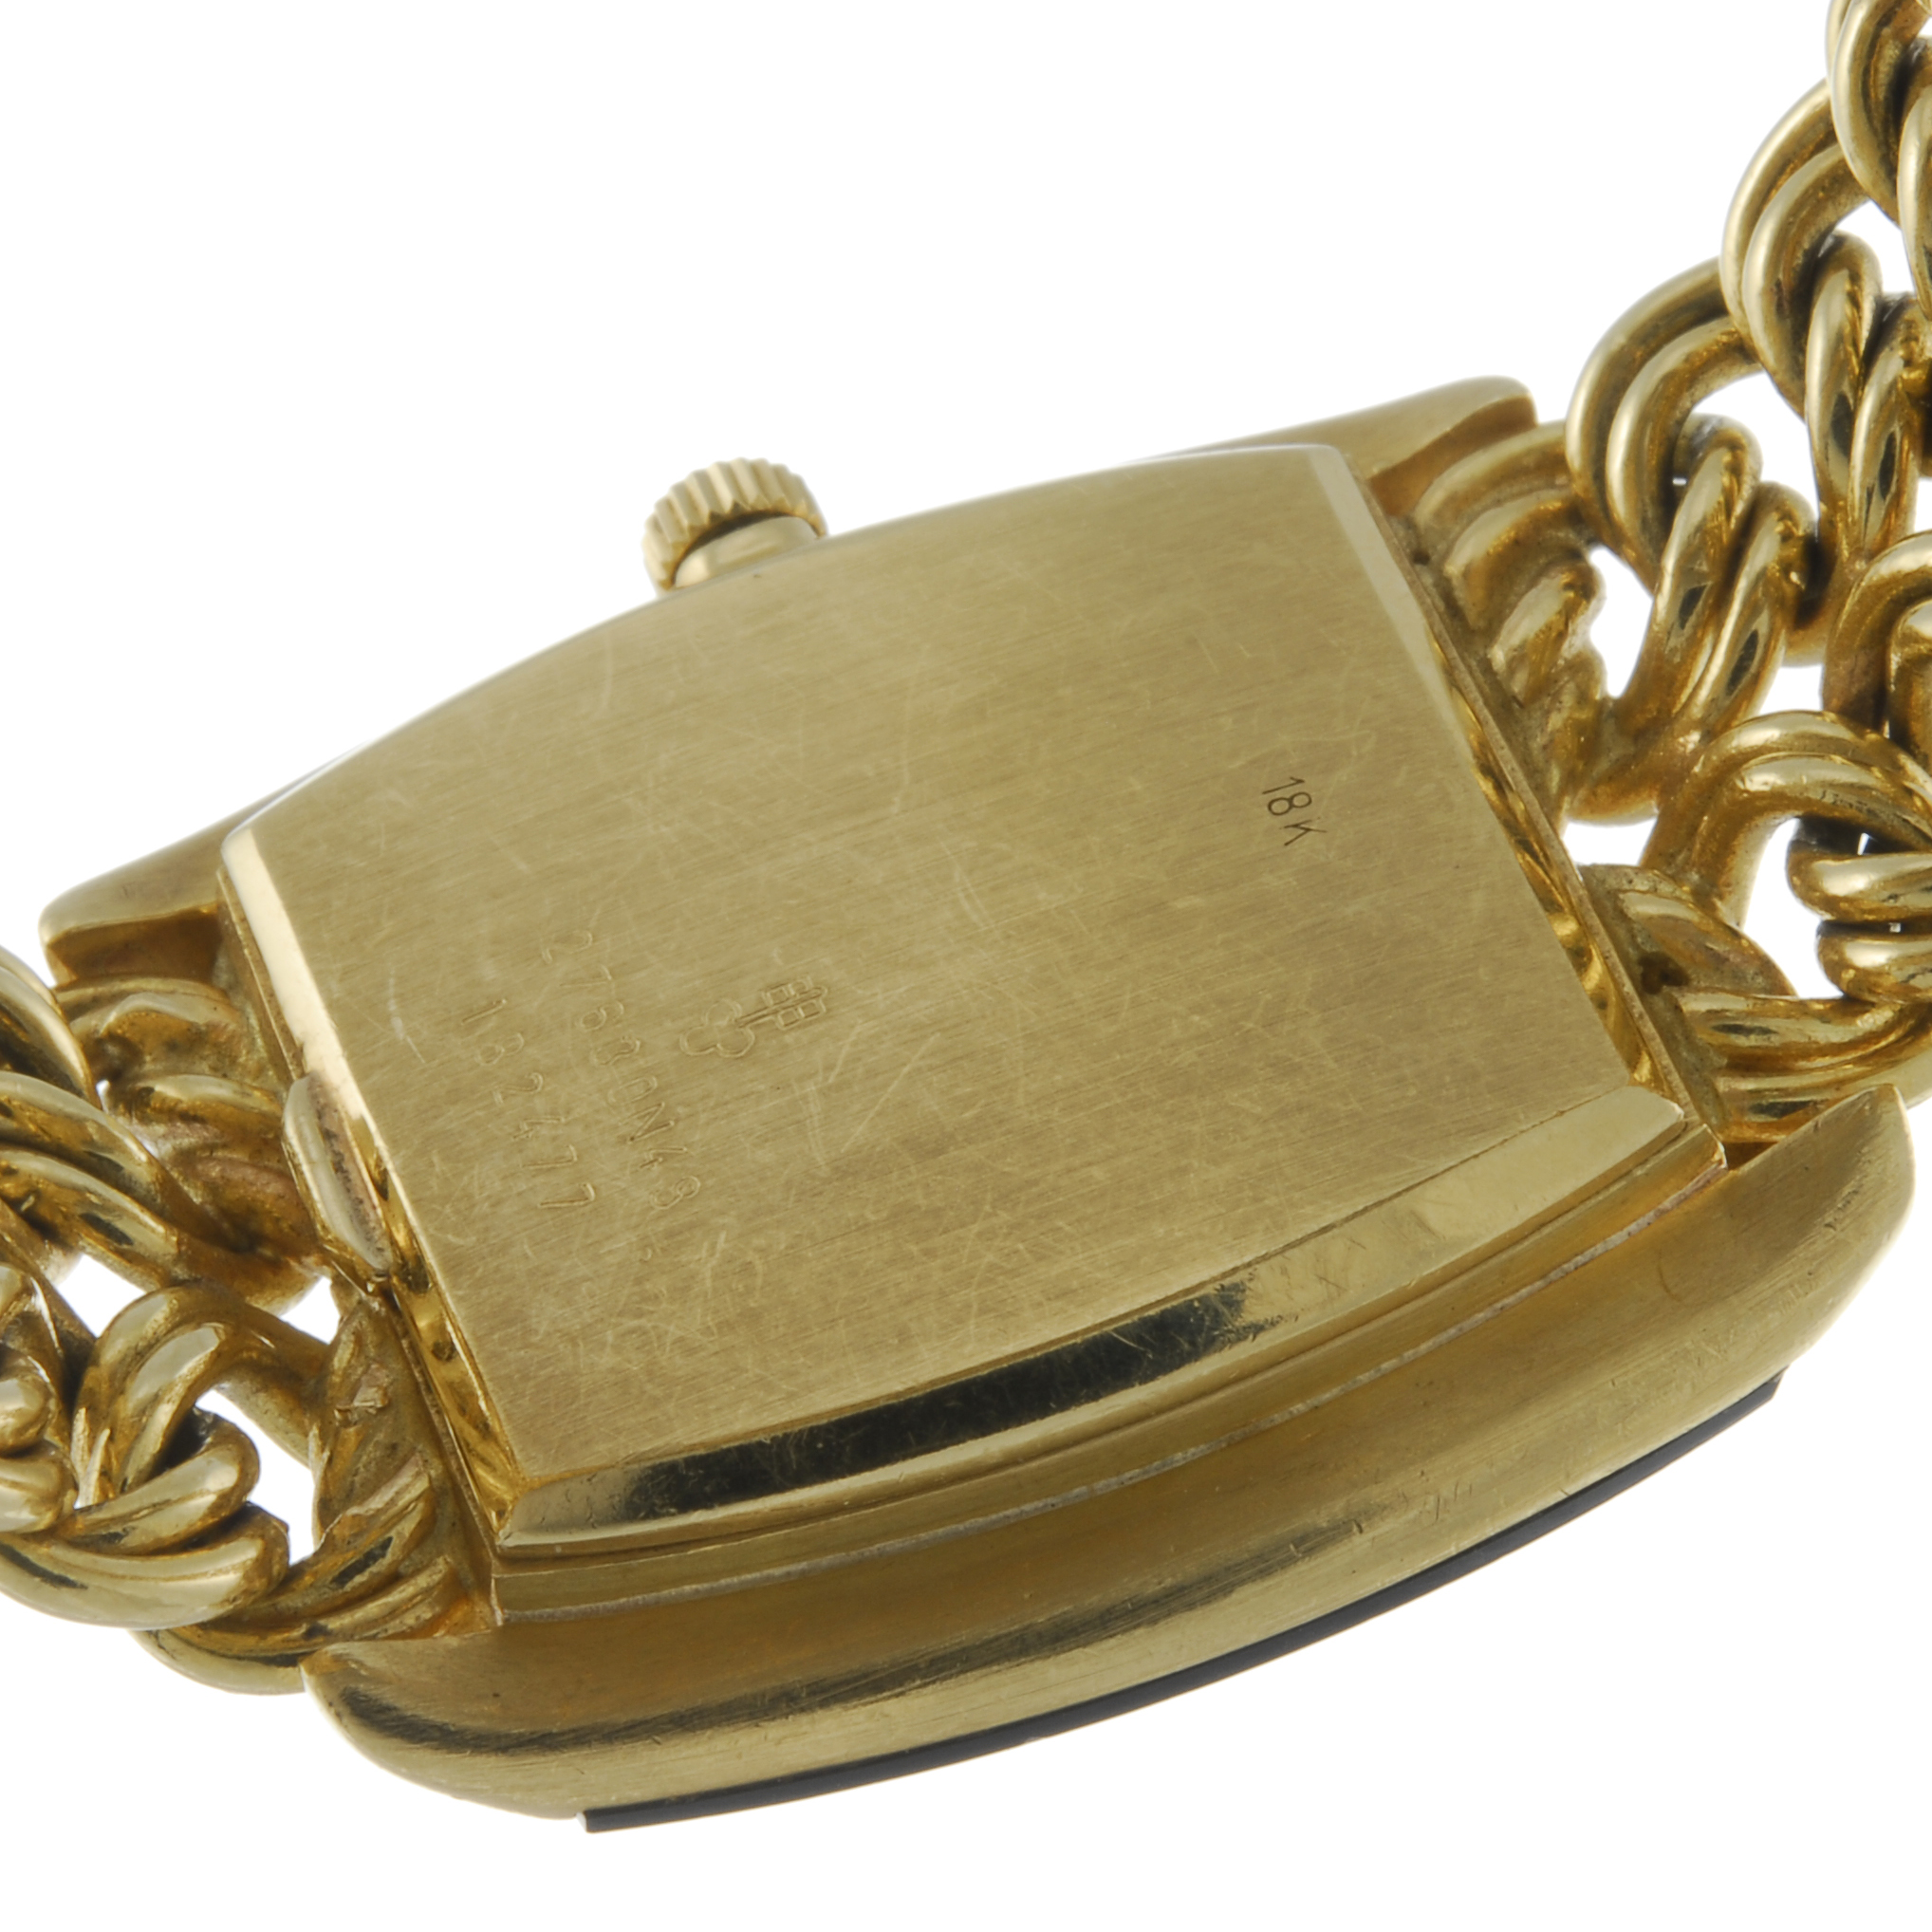 CORUM - a lady's bracelet watch. Yellow metal case, stamped 18k with poincon. Numbered 27630N48 - Image 2 of 4